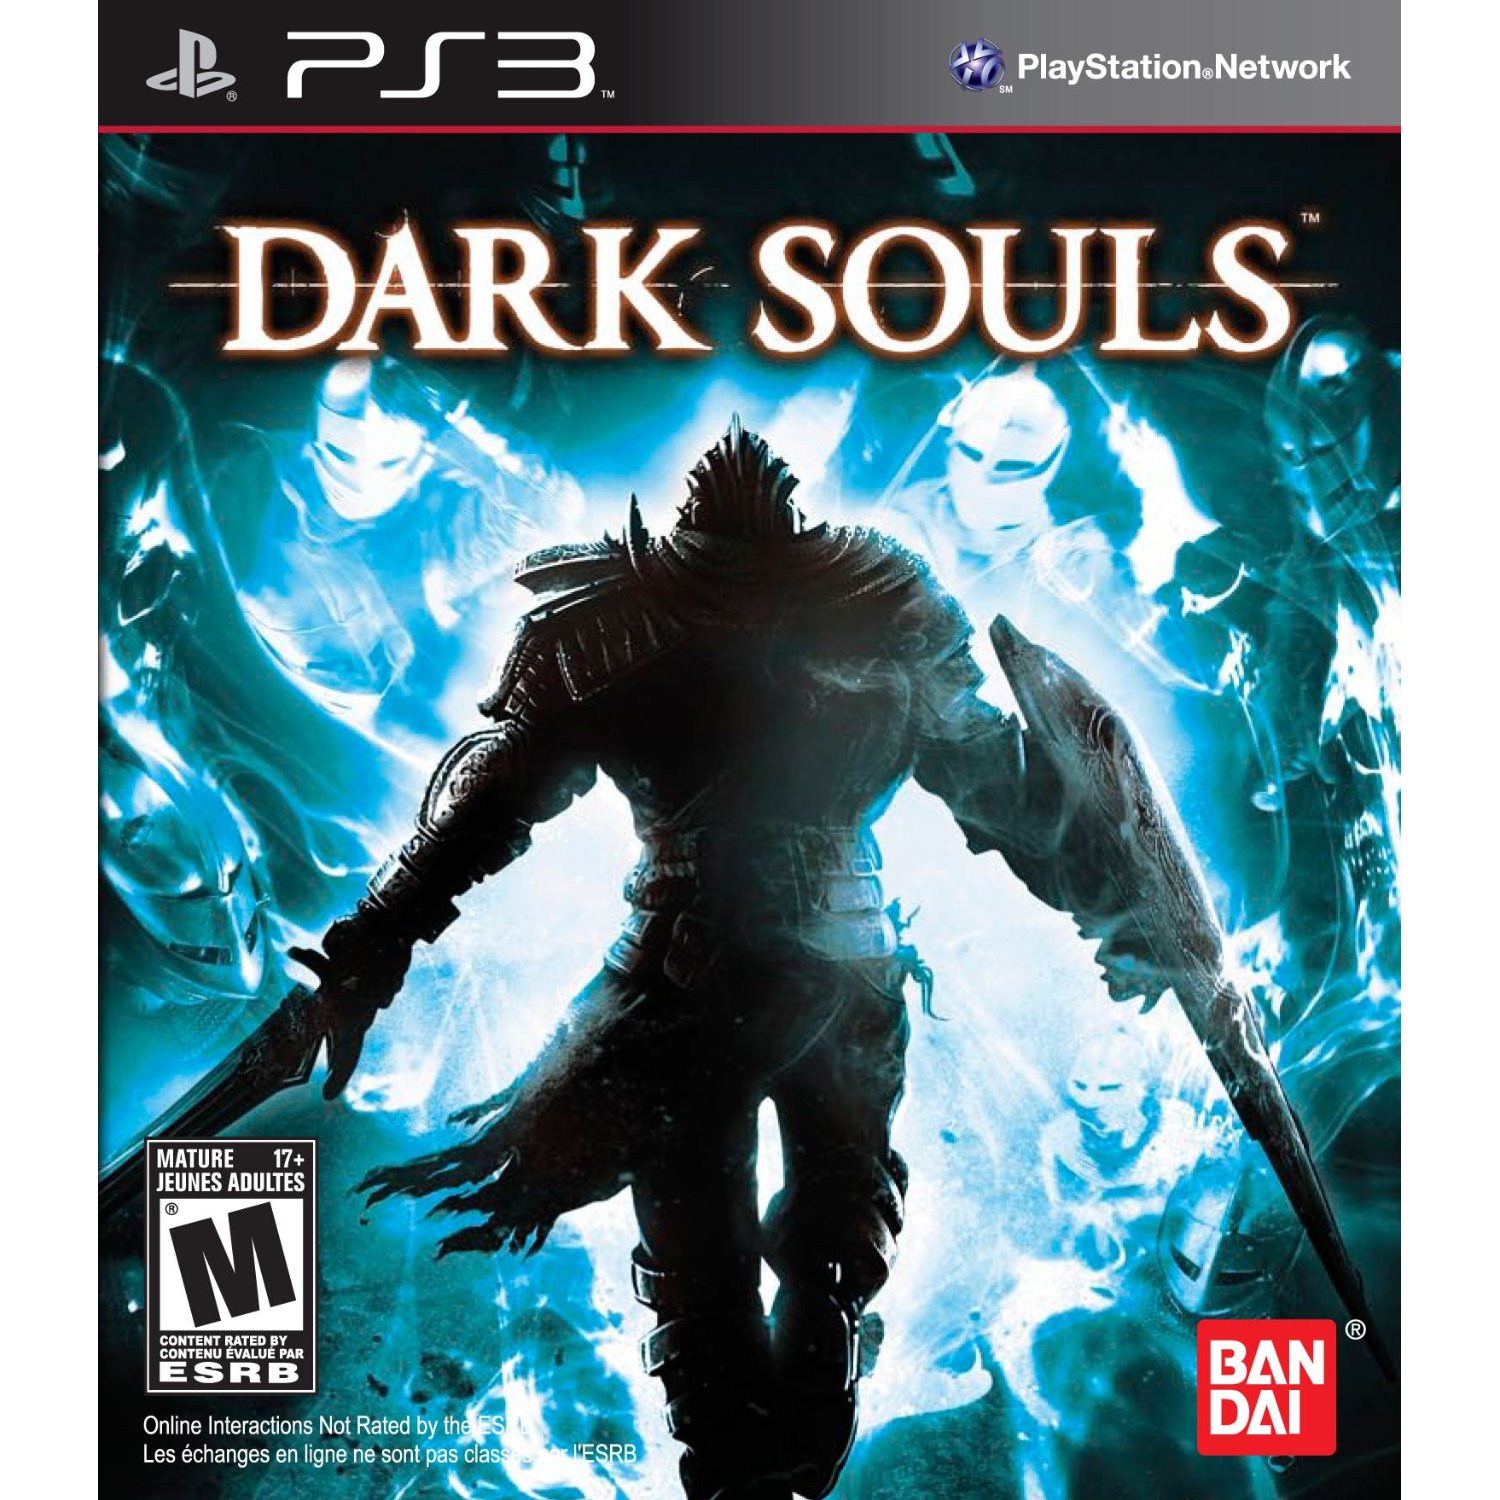 http://thetechjournal.com/wp-content/uploads/images/1108/1312959357-dark-souls-game-review-for-ps3-and-xbox-360-1.jpg